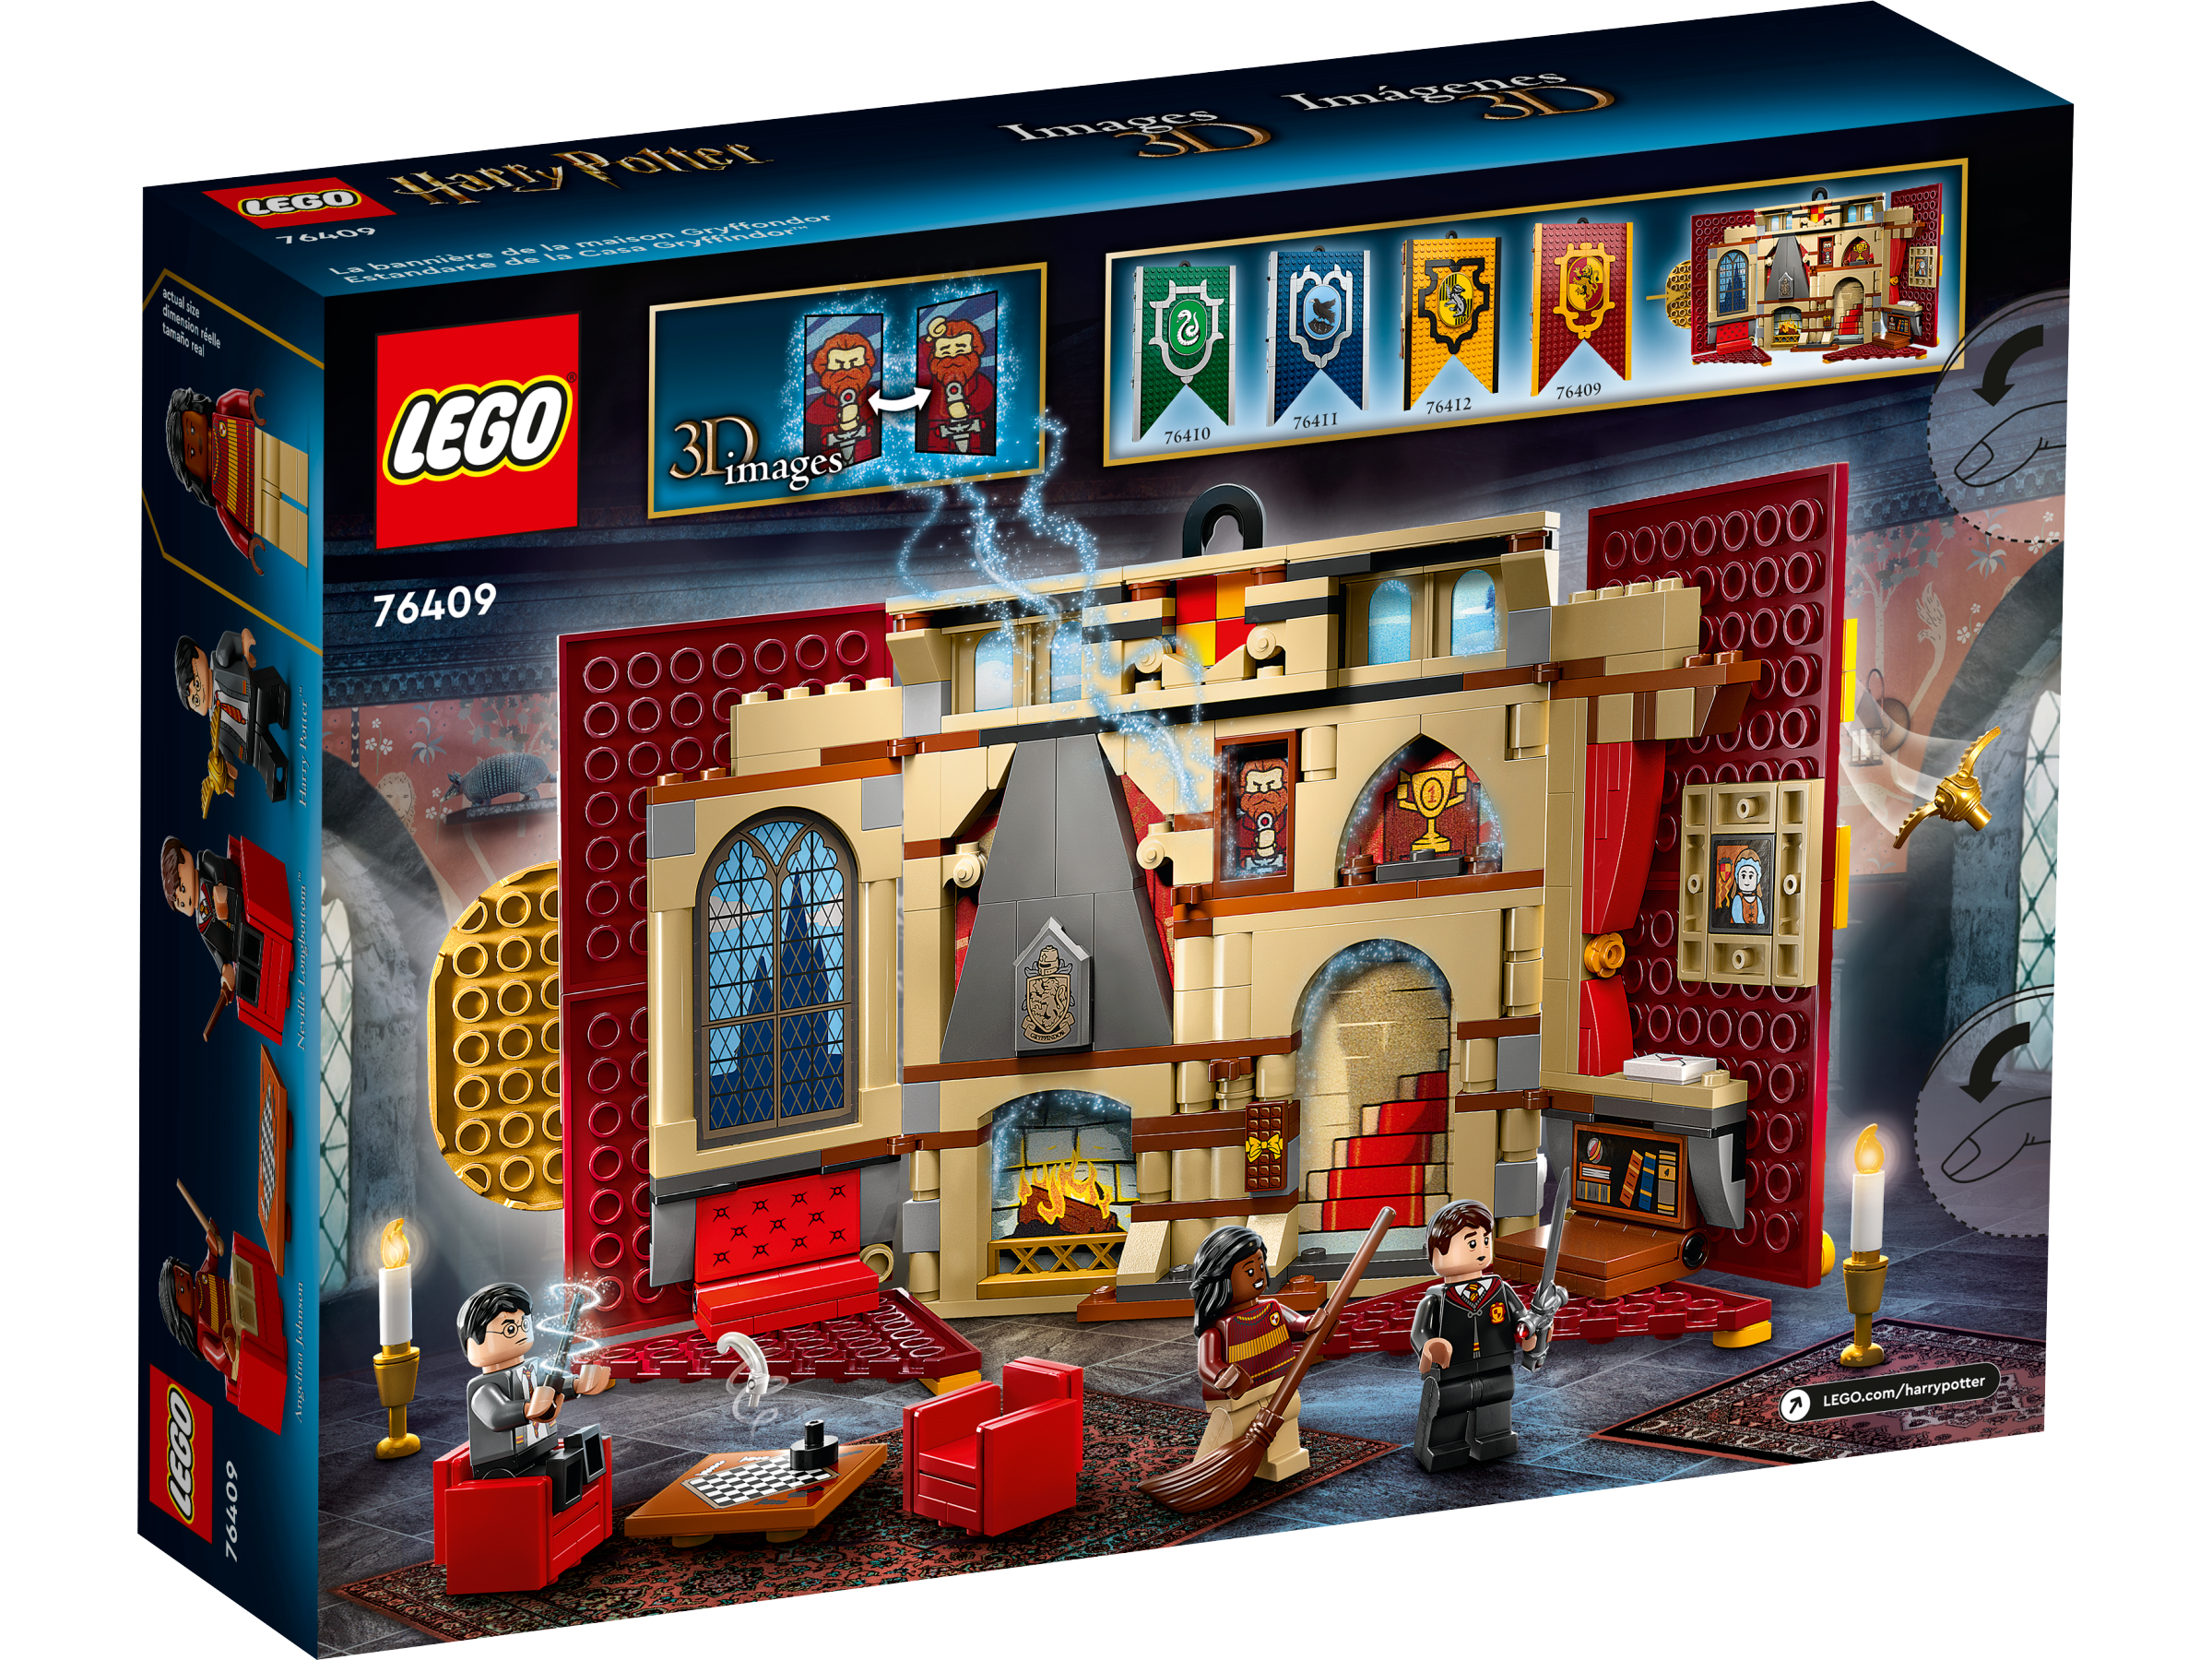 Lego Harry Potter Gryffindor House Banner Set 76409 With LEGO Building  Elements, Hogwarts Castle Common Room Toy or Wall Display, Fold Up Travel  Toy